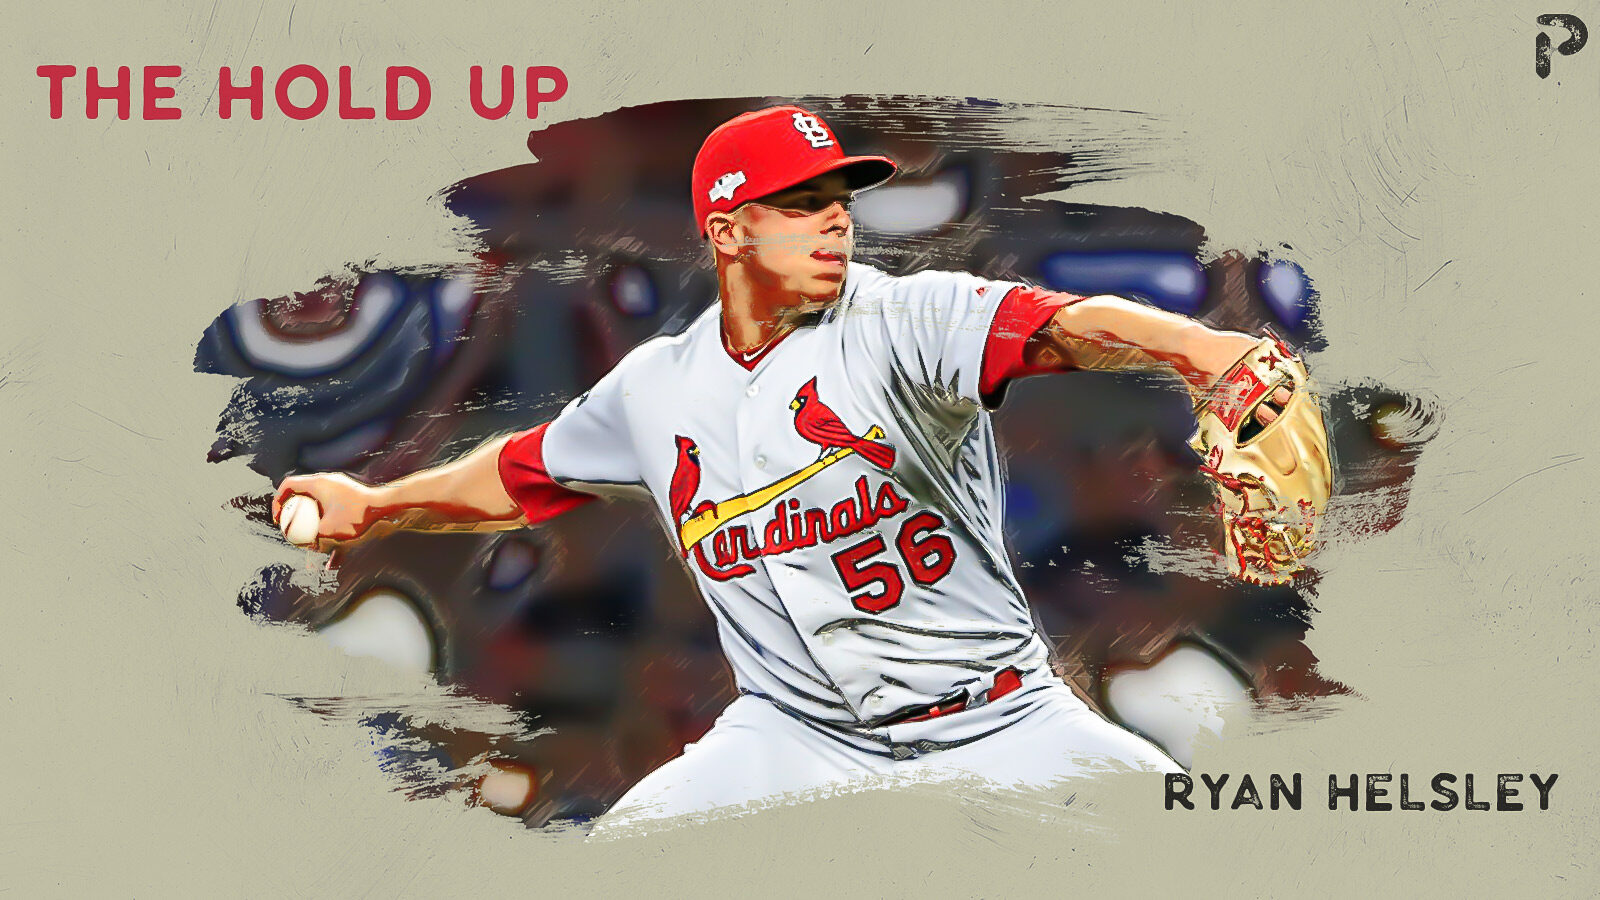 The Hold Up 5/5: Ranking the Top 100 Relievers for Holds Every Thursday